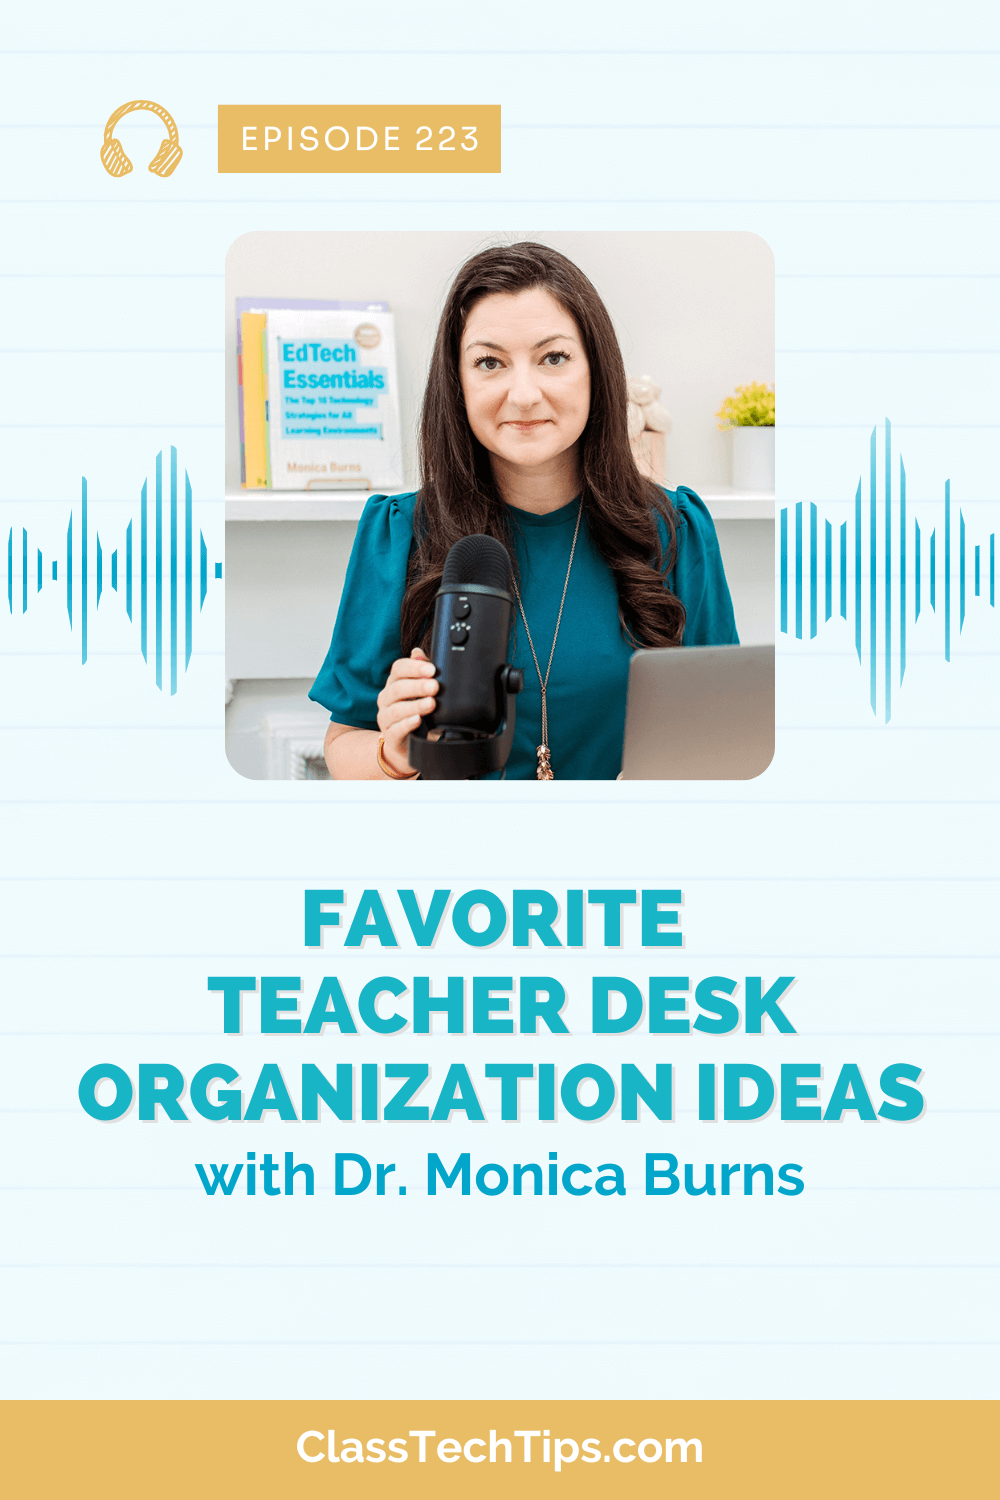 Image of the podcast host at her desk, discussing teacher desk organization strategies with a digital spin to optimize the workspace for the upcoming school year.